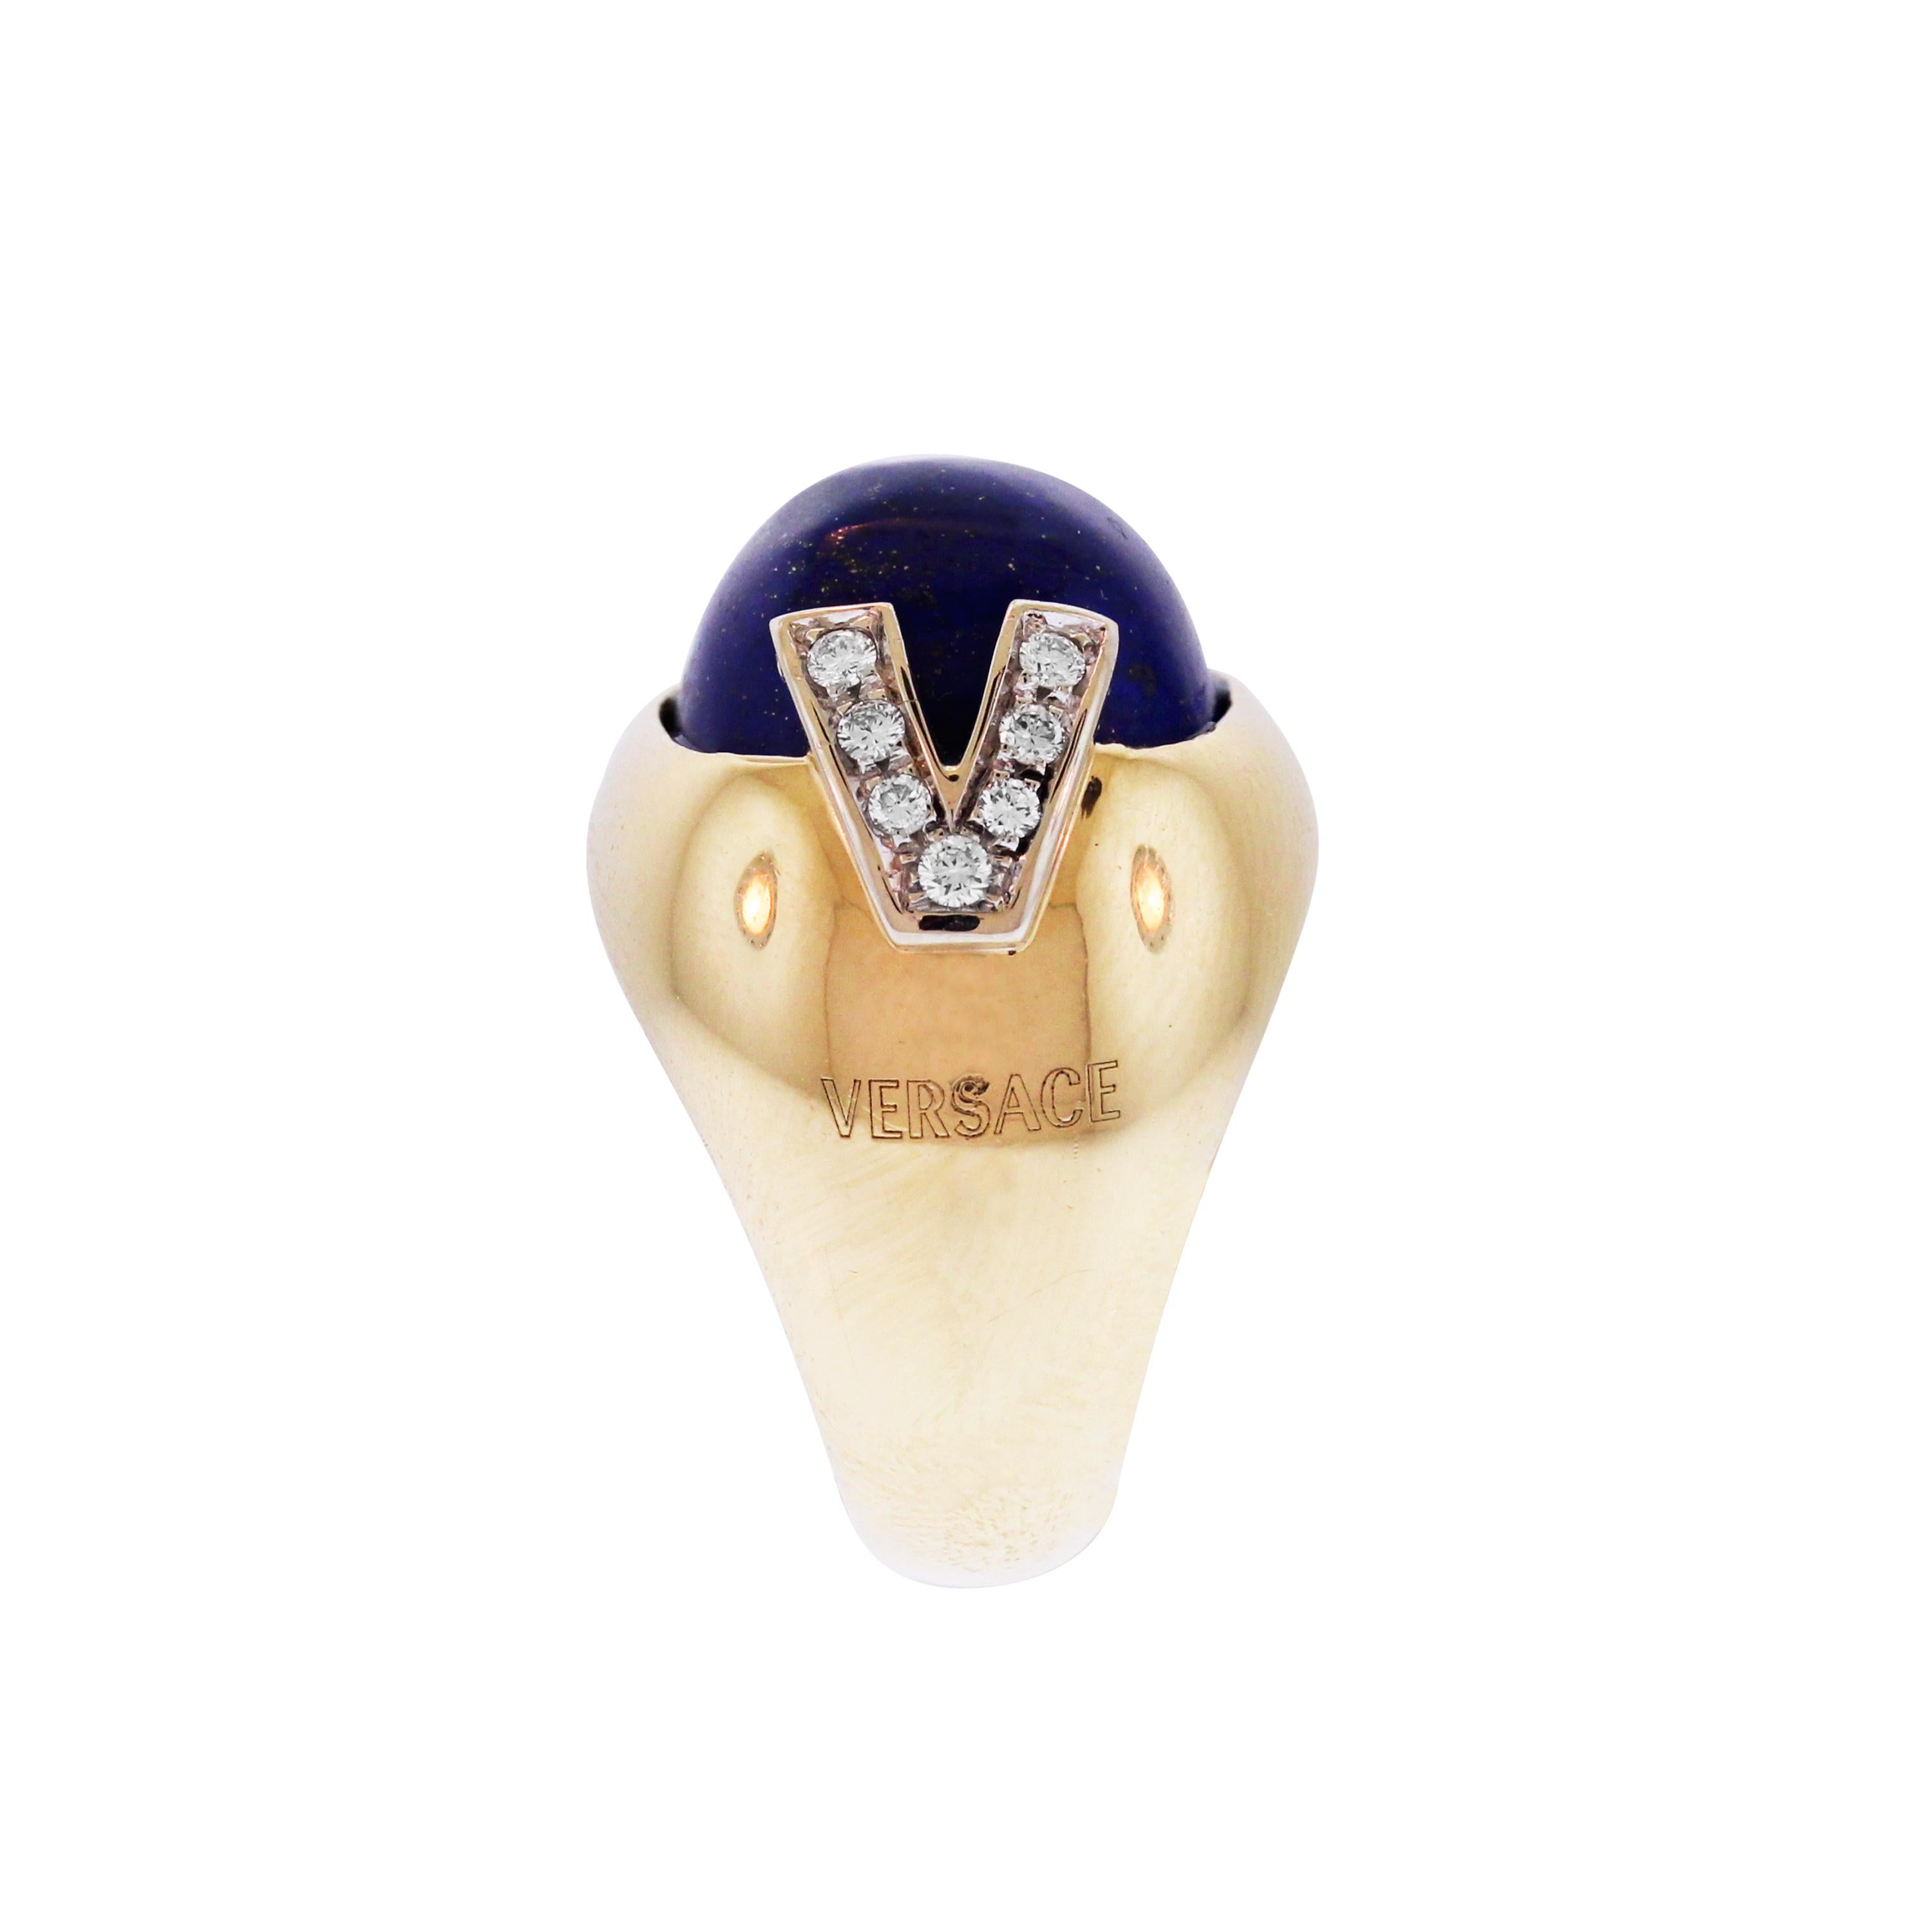 IF YOU ARE REALLY INTERESTED, CONTACT US WITH ANY REASONABLE OFFER. WE WILL TRY OUR BEST TO MAKE YOU HAPPY!

18K Gold and Diamond Ring with Lapis Lazuli center by Versace

This ring features a Lapis Lazuli center apprx. 28 carat with two diamond 